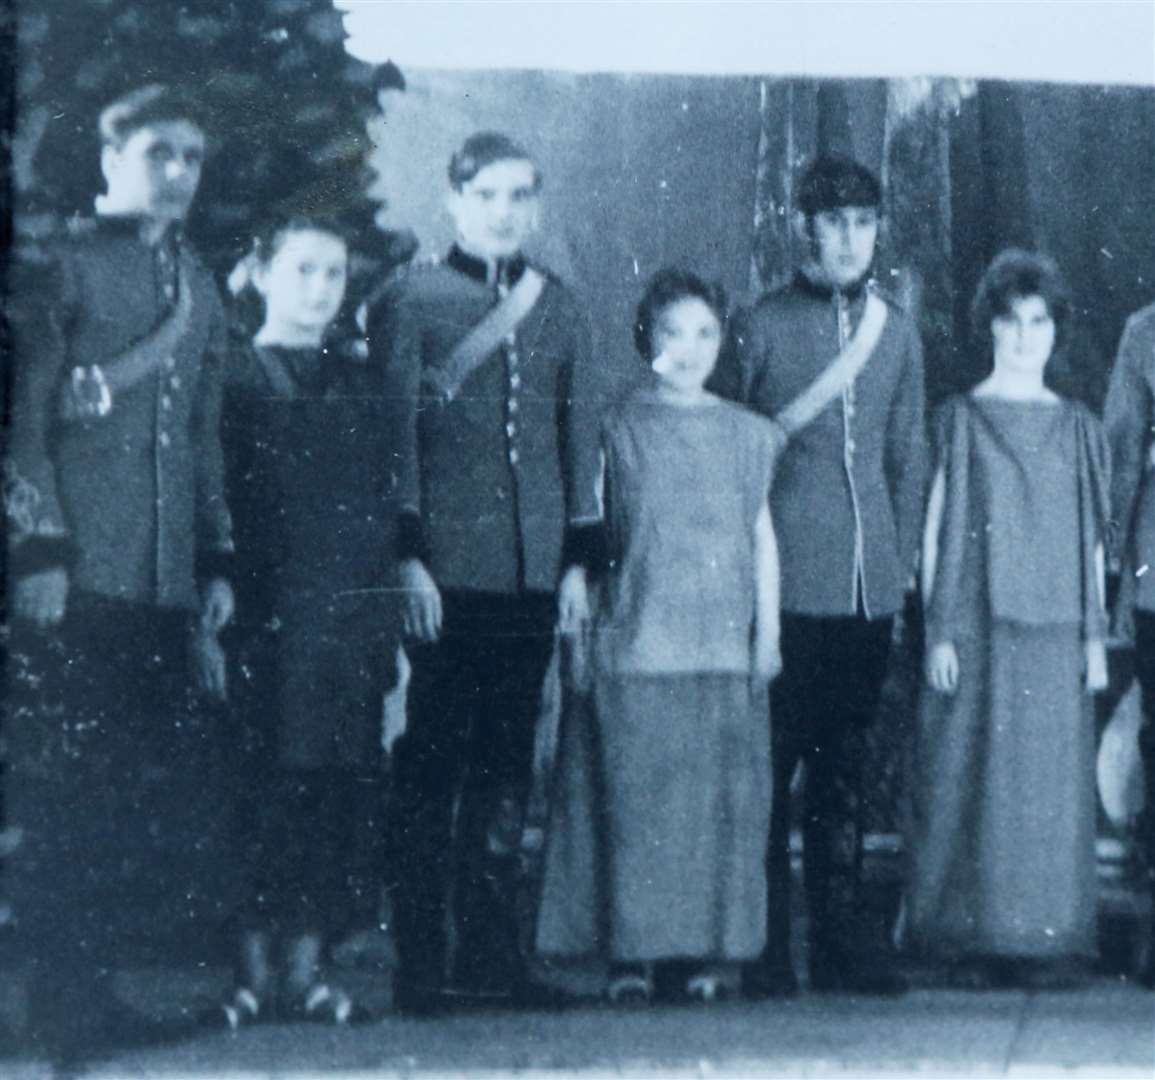 Cast of "Patience" which was performed at Gordonstoun School. Prince Charles is 5th from left.